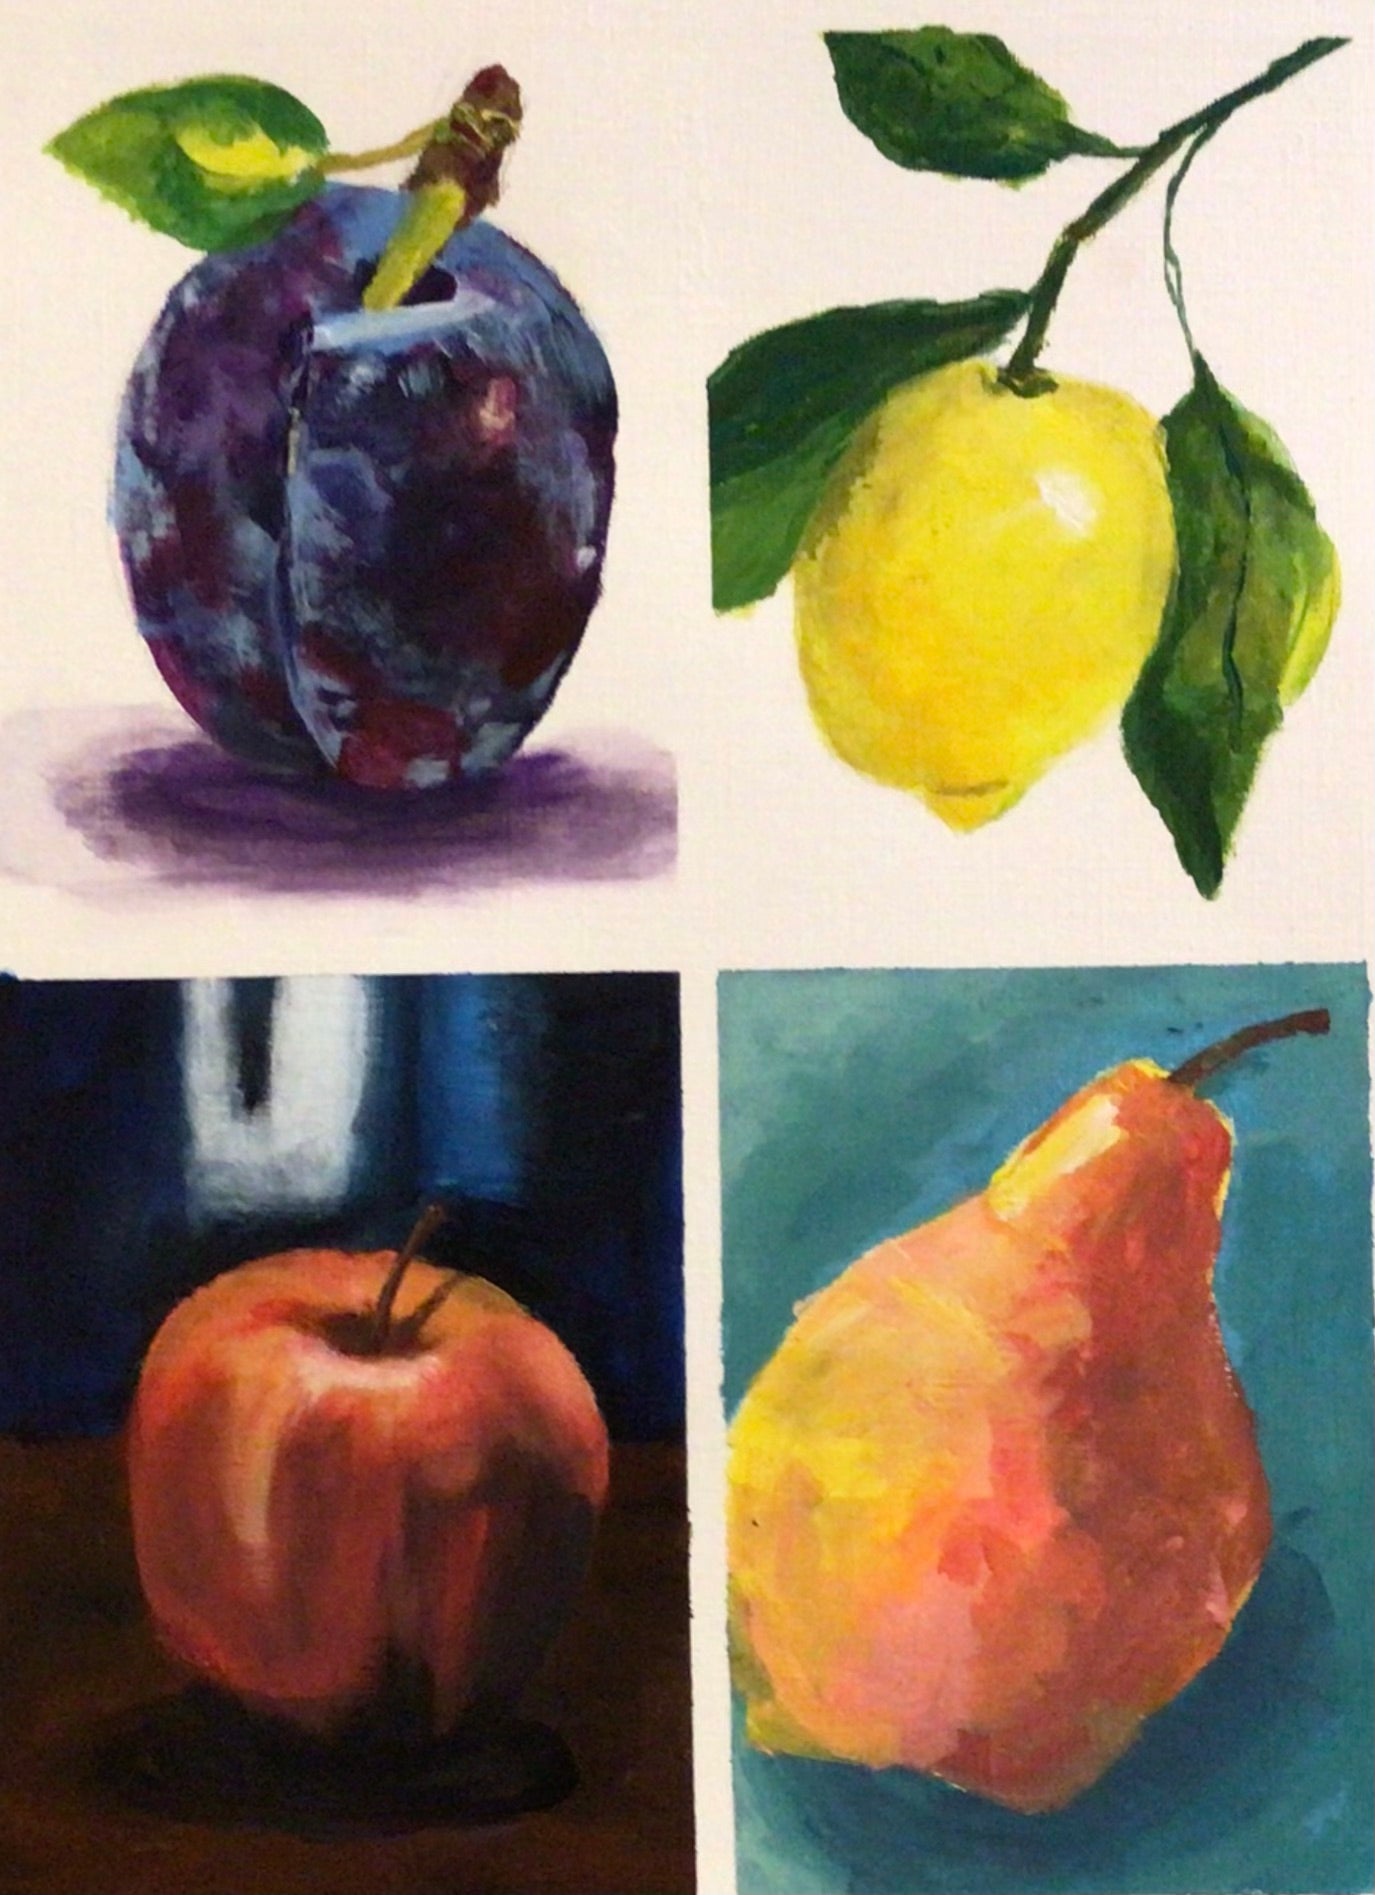 Colour theory. 4 exercises of fruit: clockwise from top left, plum, lemon, pear, apple